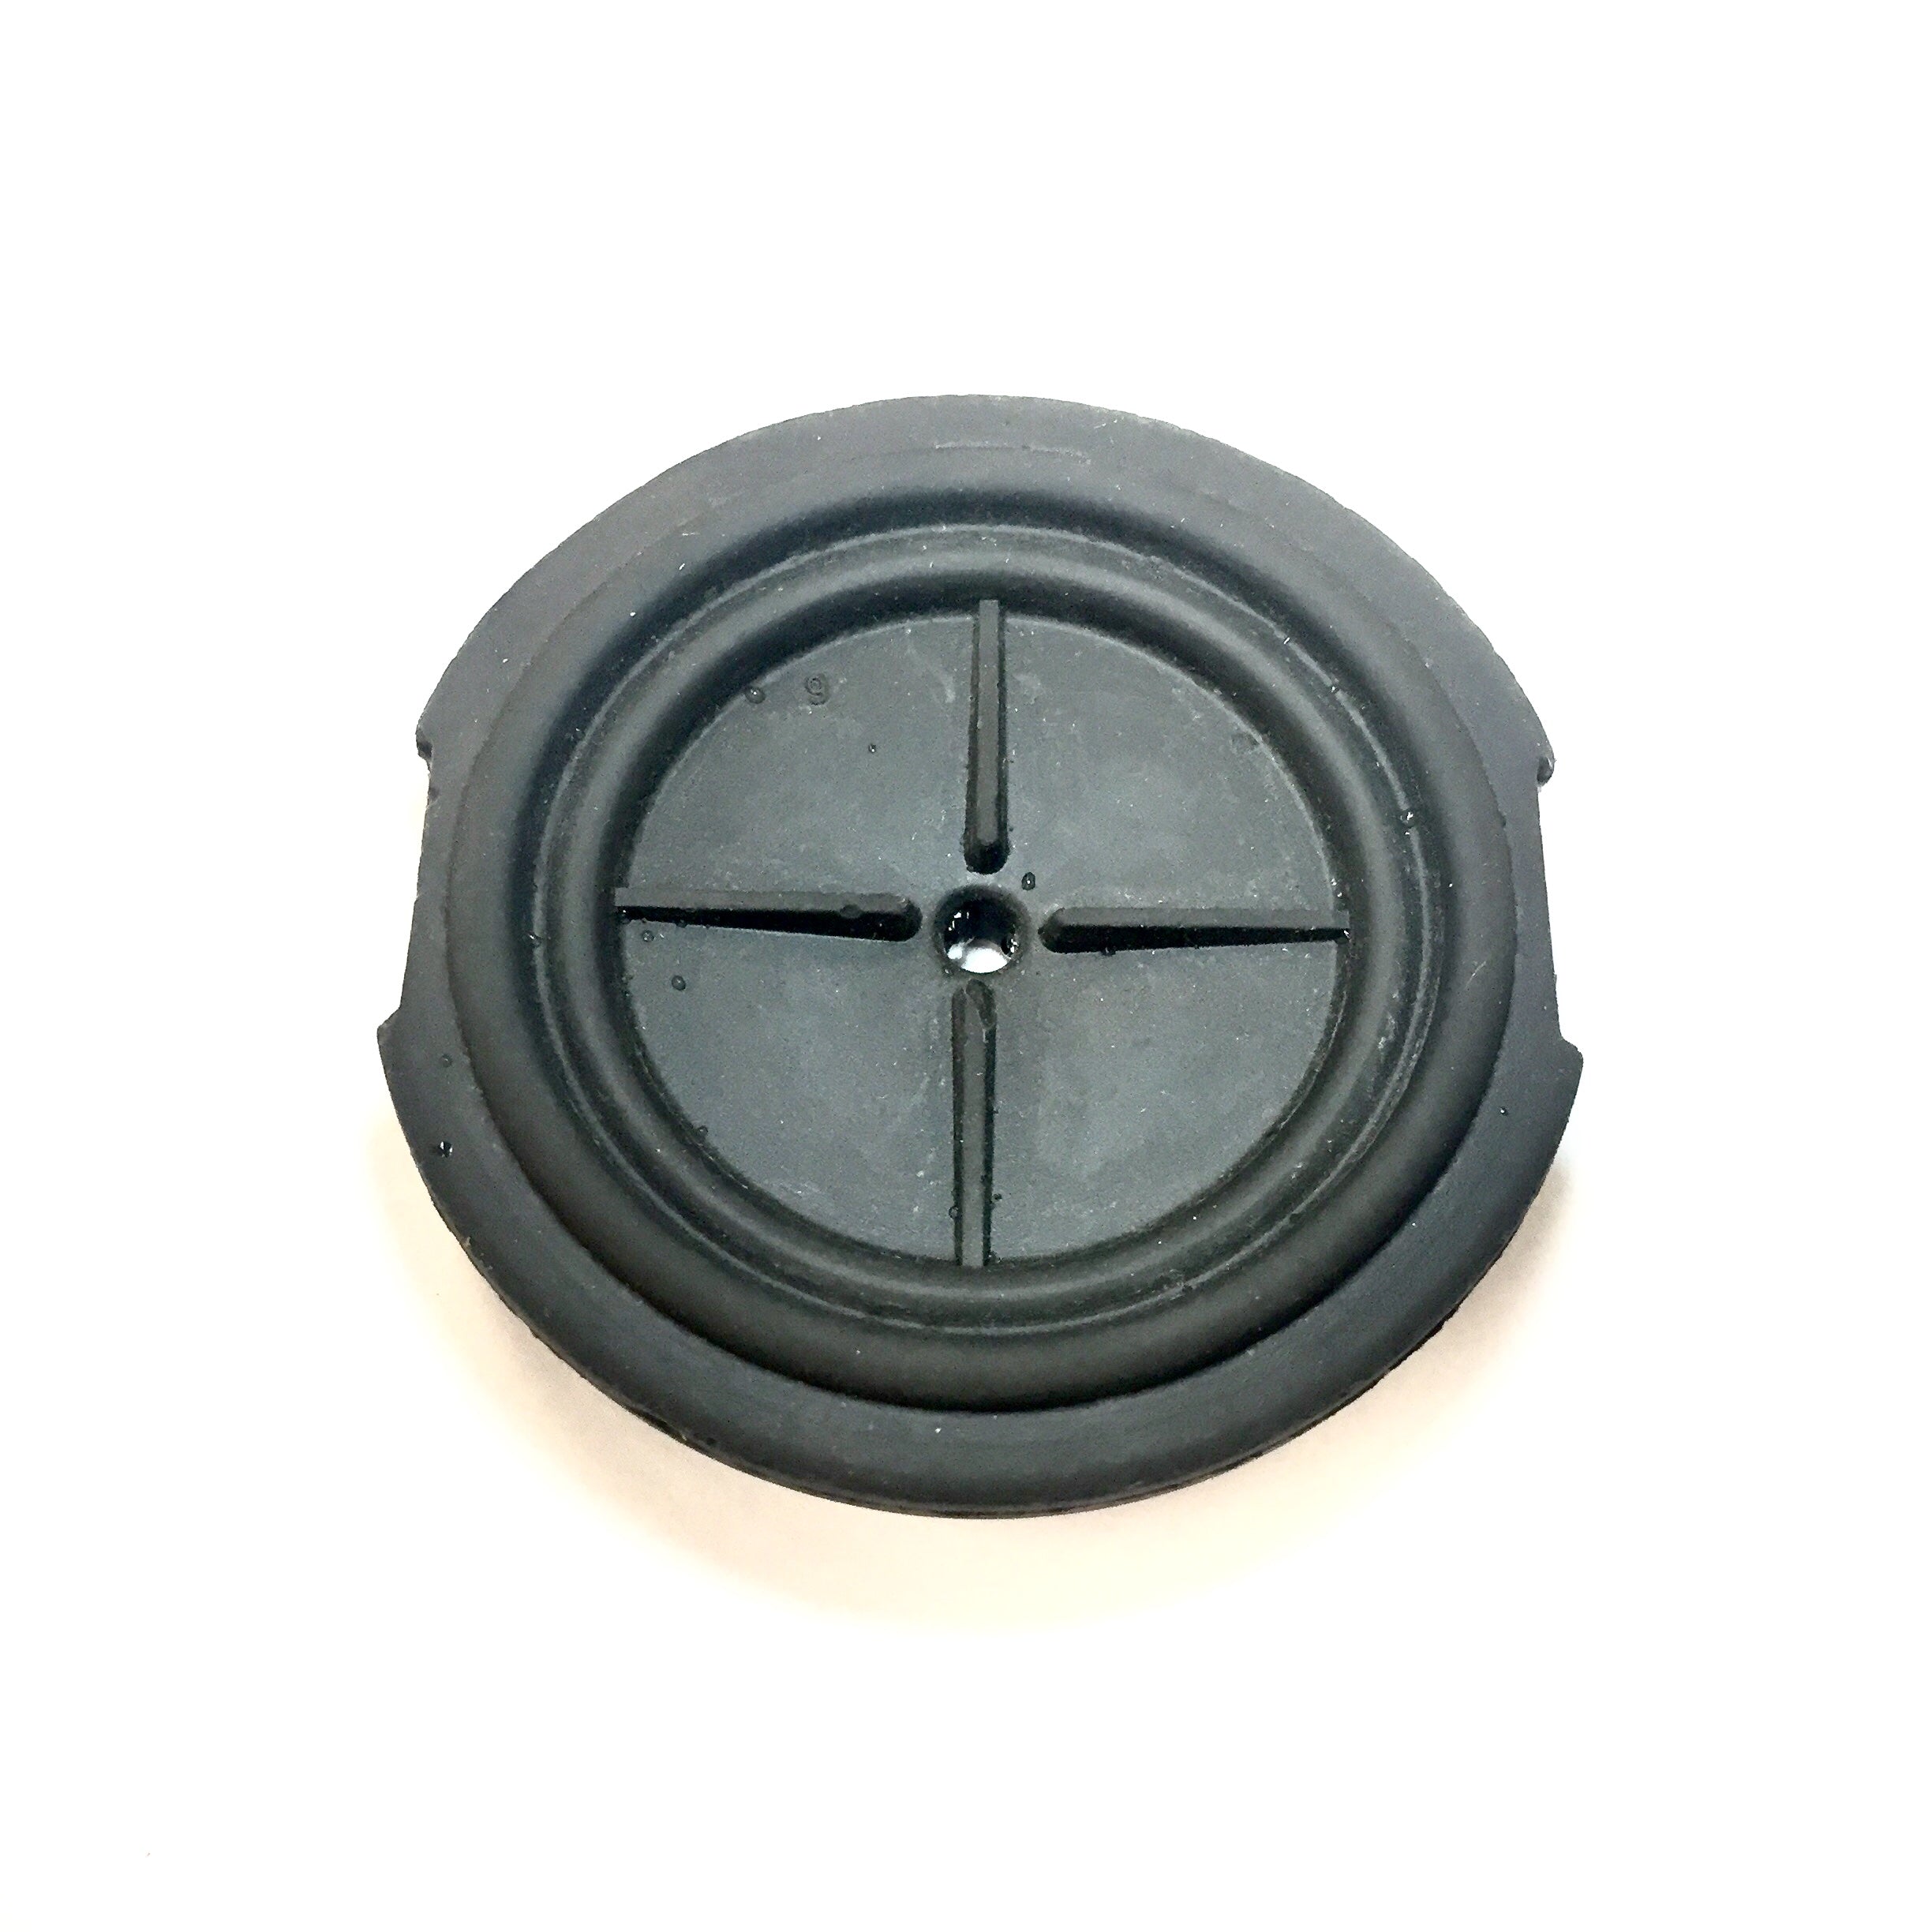 Pod Adapter Seal for Saeco